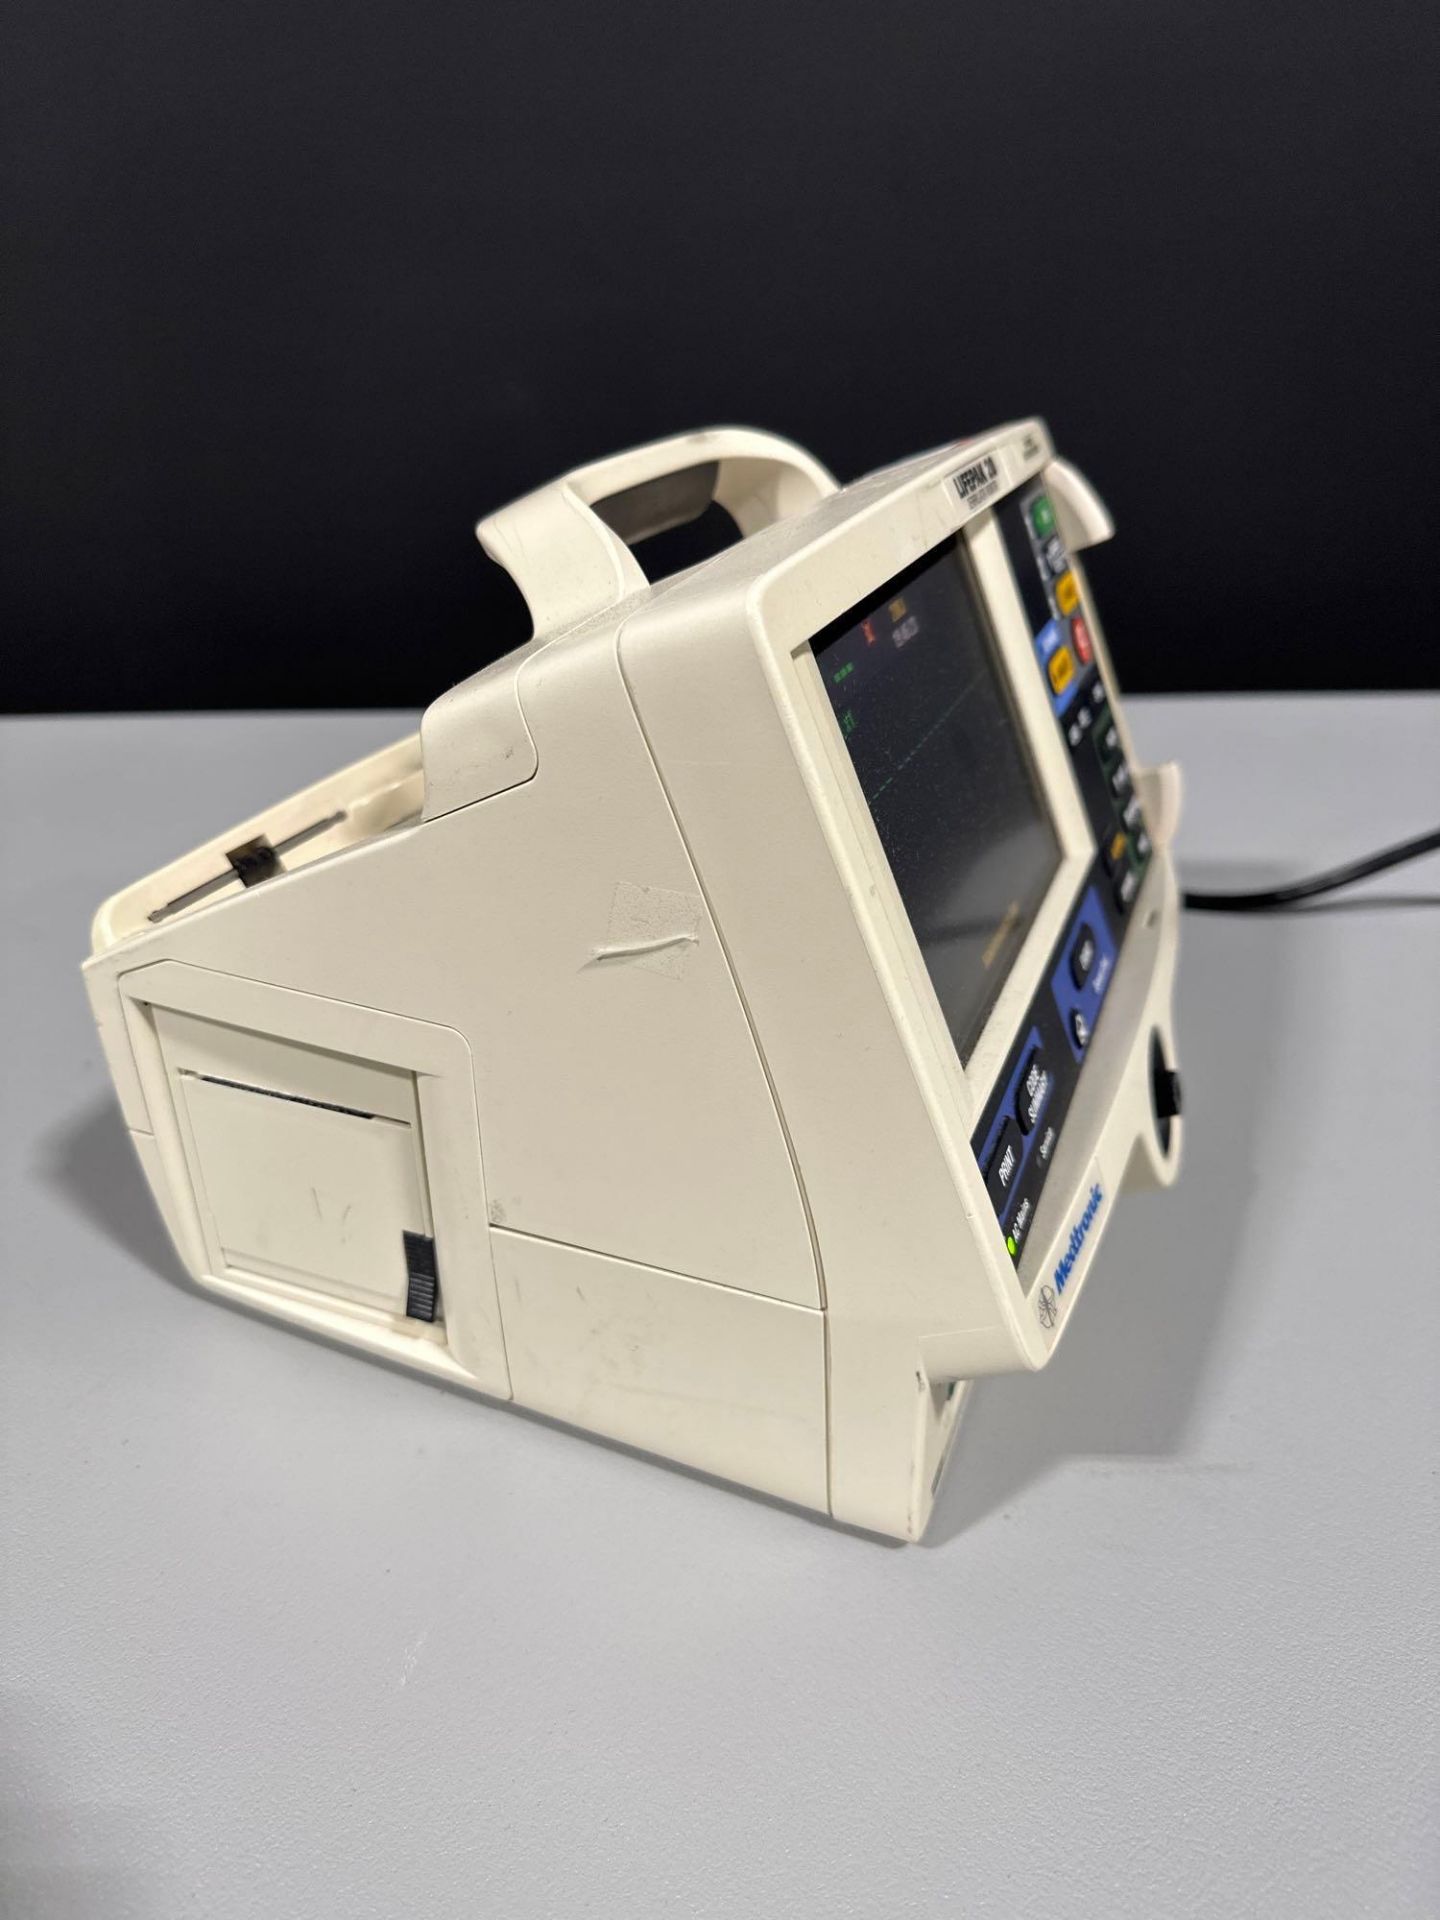 MEDTRONIC/PHYSIO CONTROL LIFEPAK 20 DEFIB WITH PACING, 3 LEAD ECG, ANALYZE (AED MODE) - Image 5 of 8